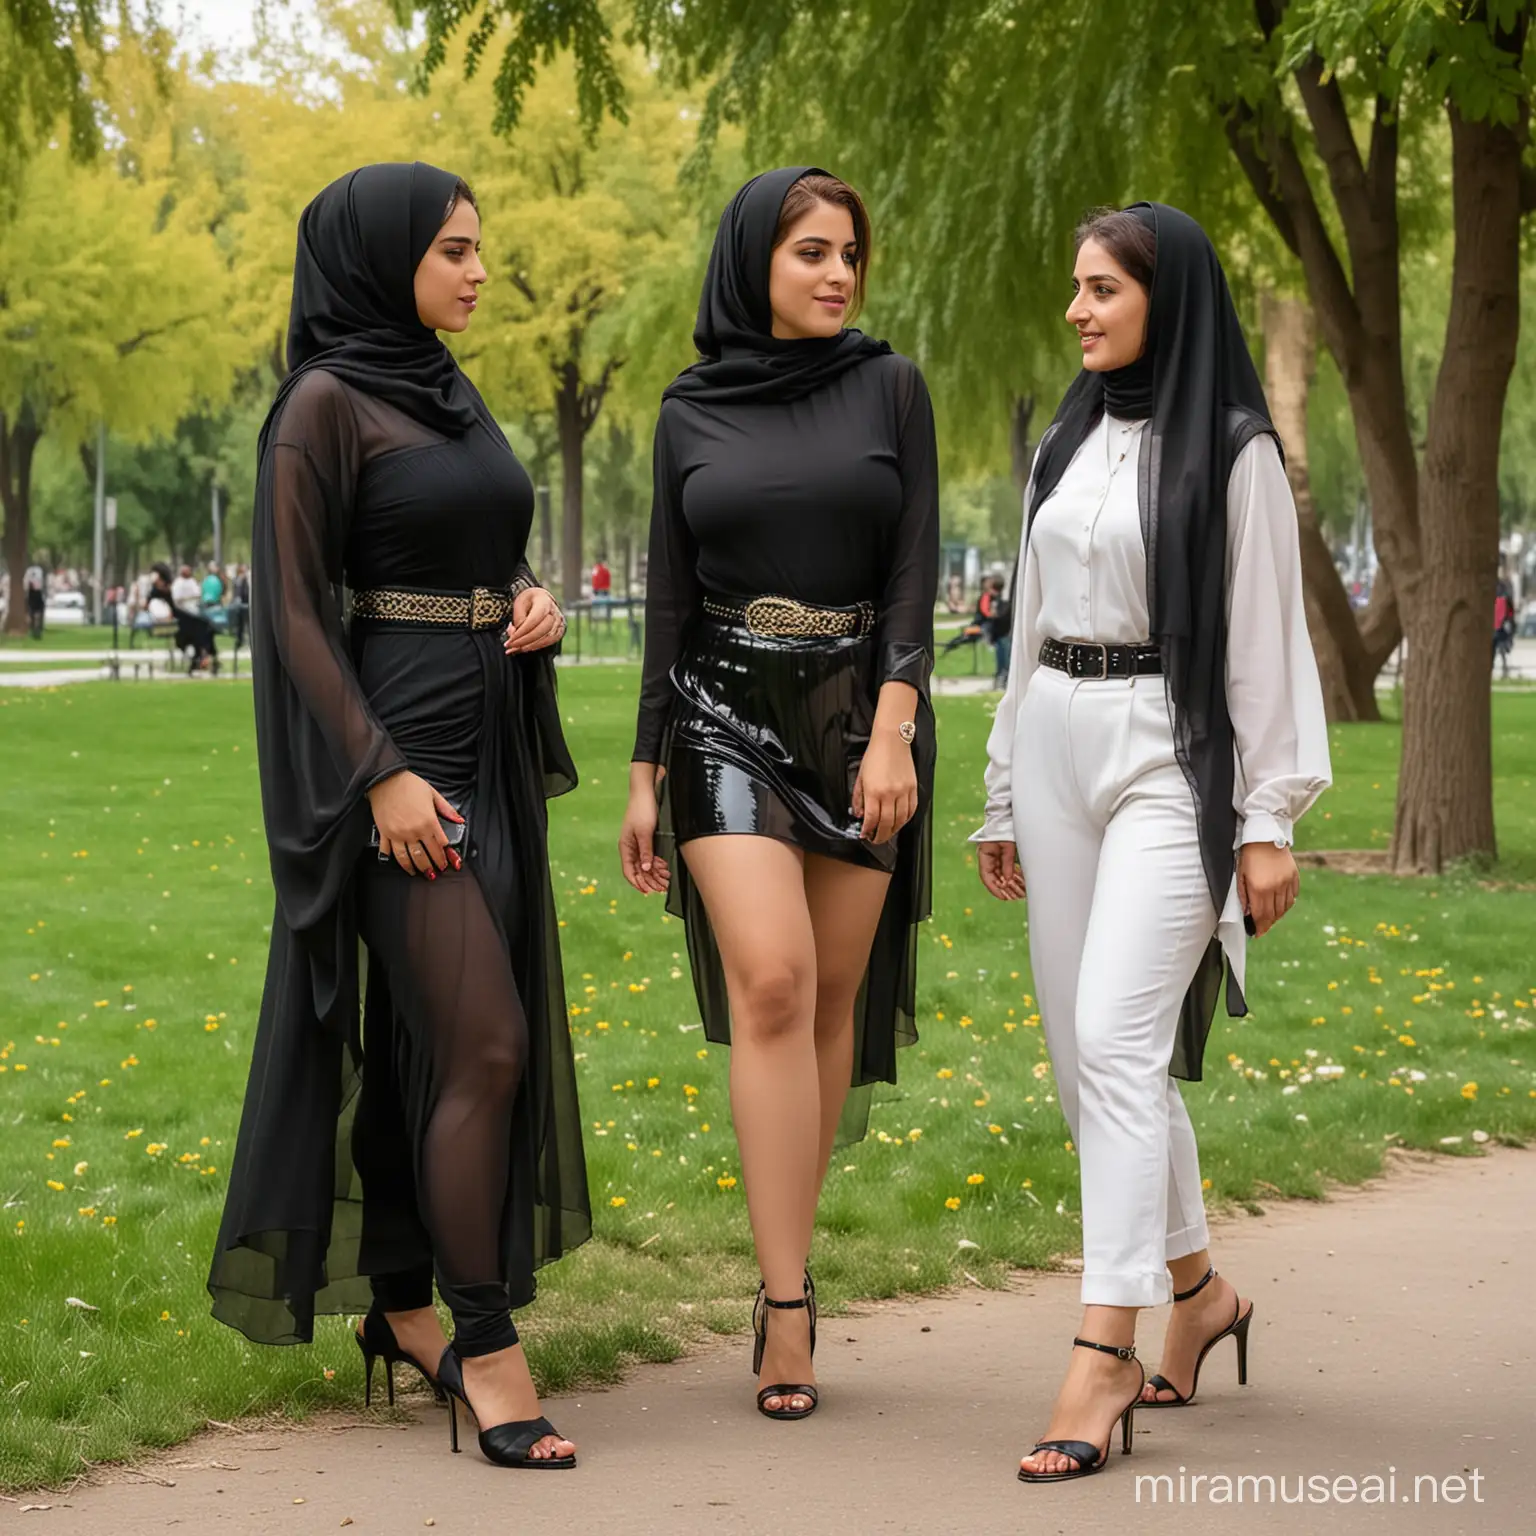 Iranian Veiled Girls Chatting in Park with Voluptuous Women